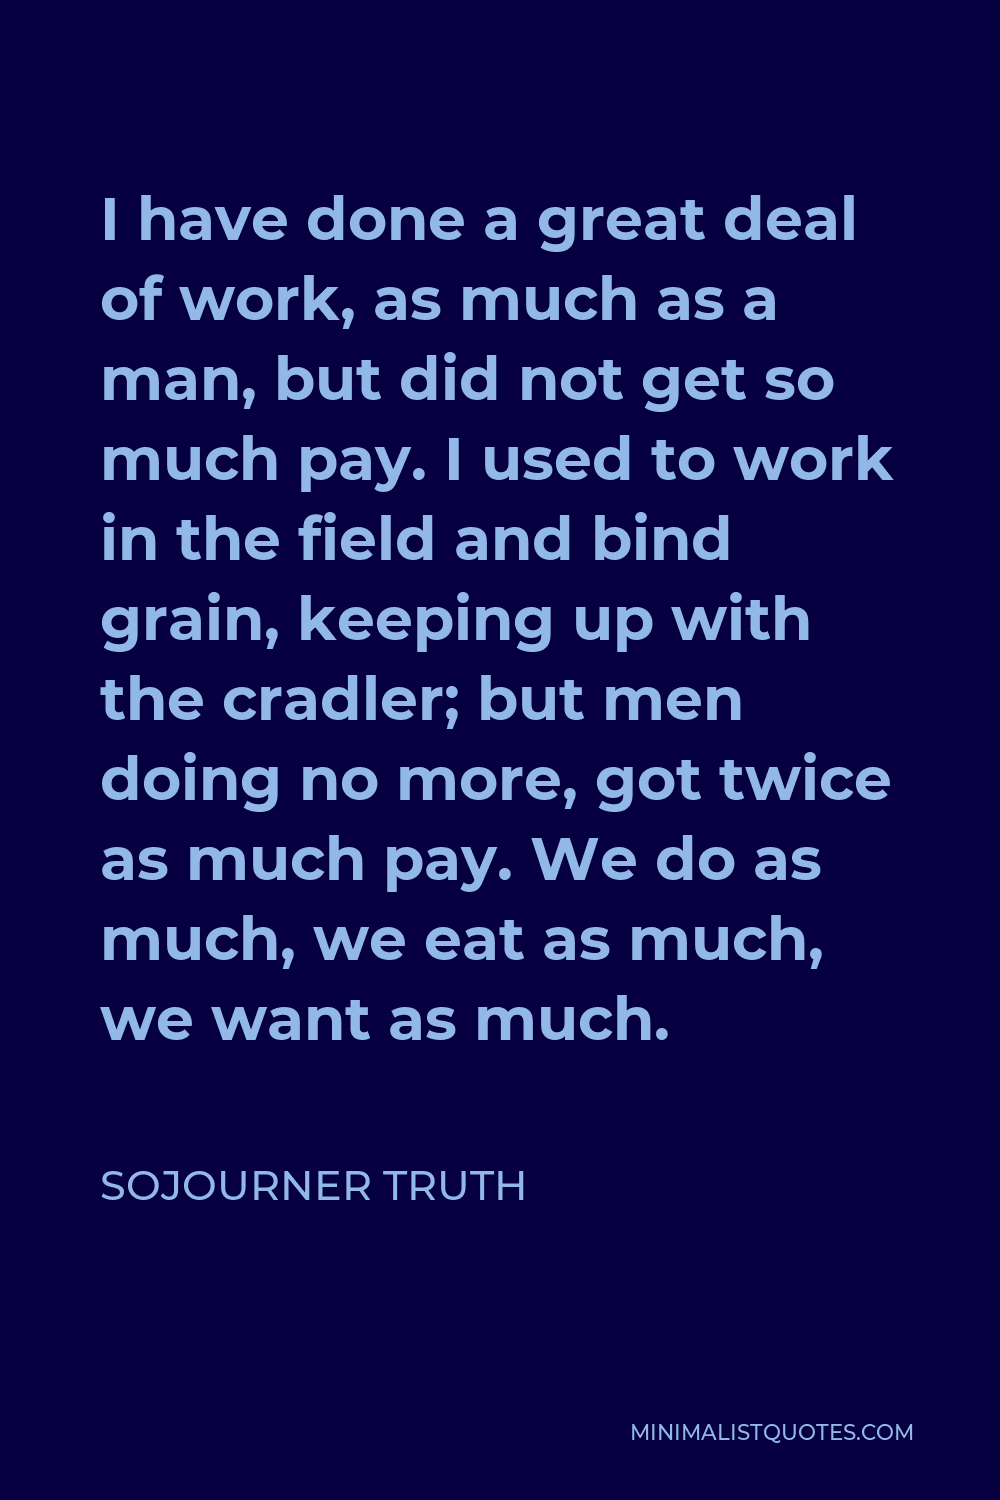 Sojourner Truth Quote - I have done a great deal of work, as much as a man, but did not get so much pay. I used to work in the field and bind grain, keeping up with the cradler; but men doing no more, got twice as much pay. We do as much, we eat as much, we want as much.